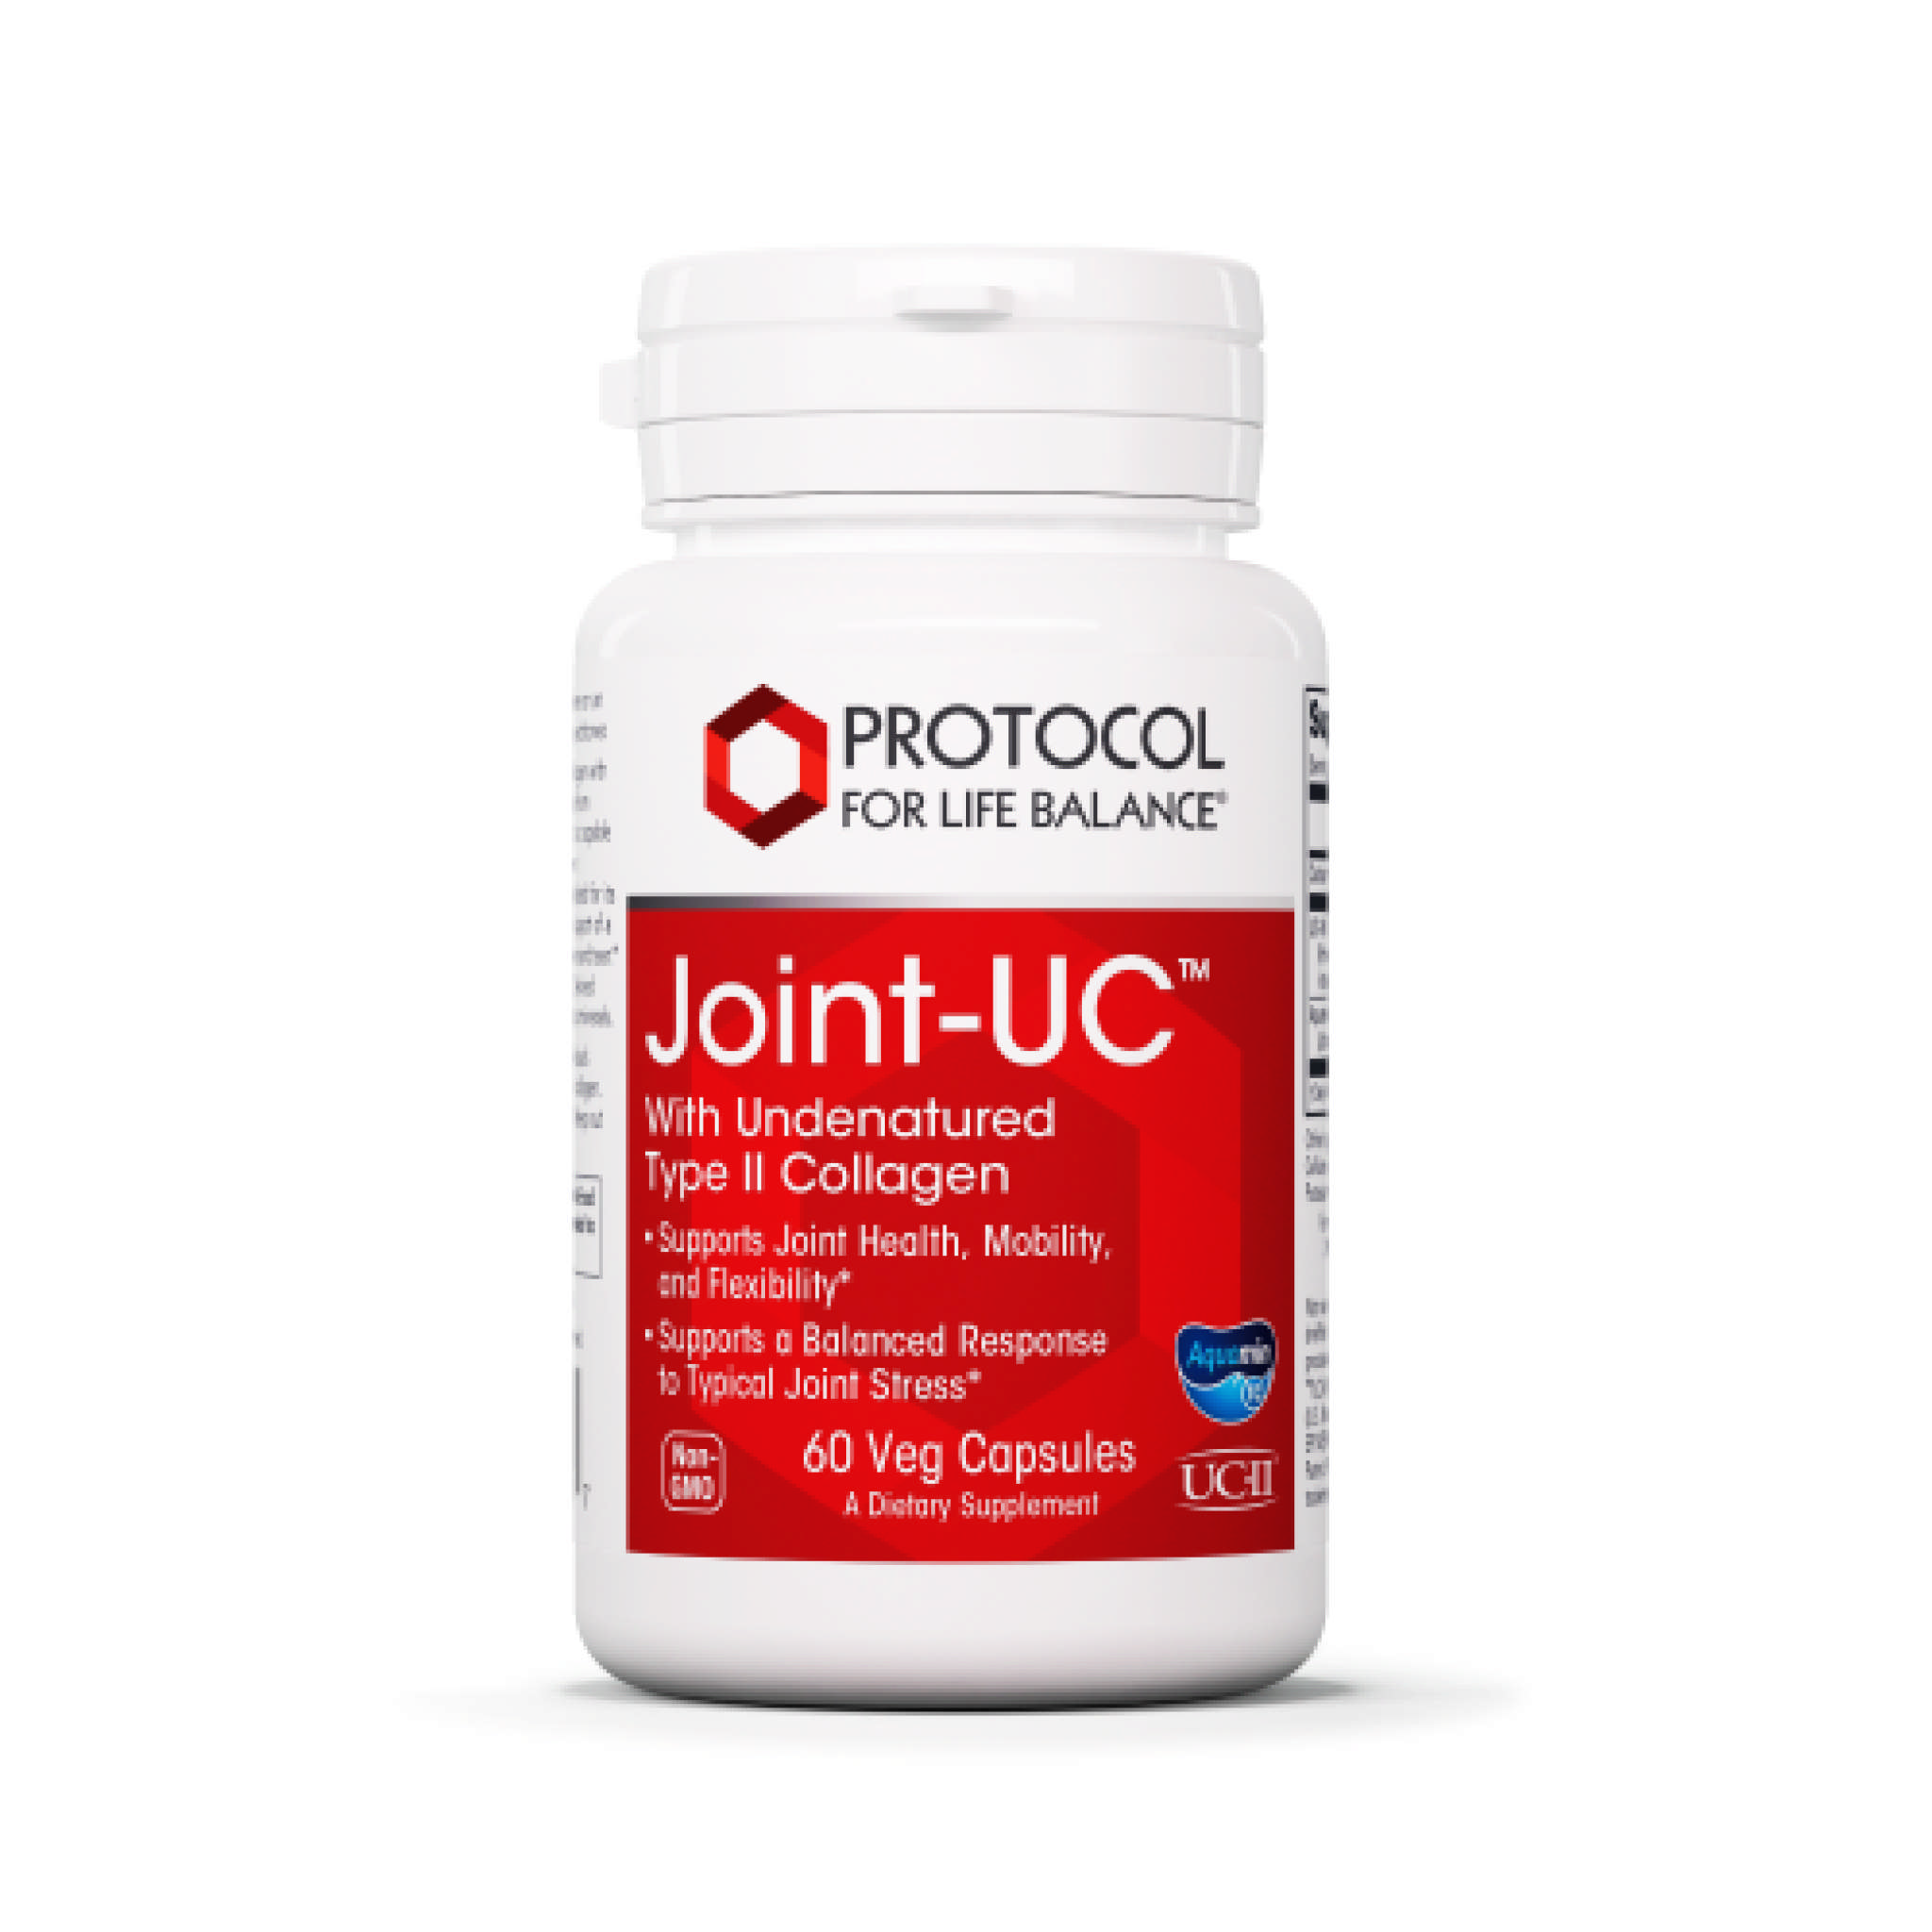 Protocol For Life Balance - Joint Uc Collagen vCap